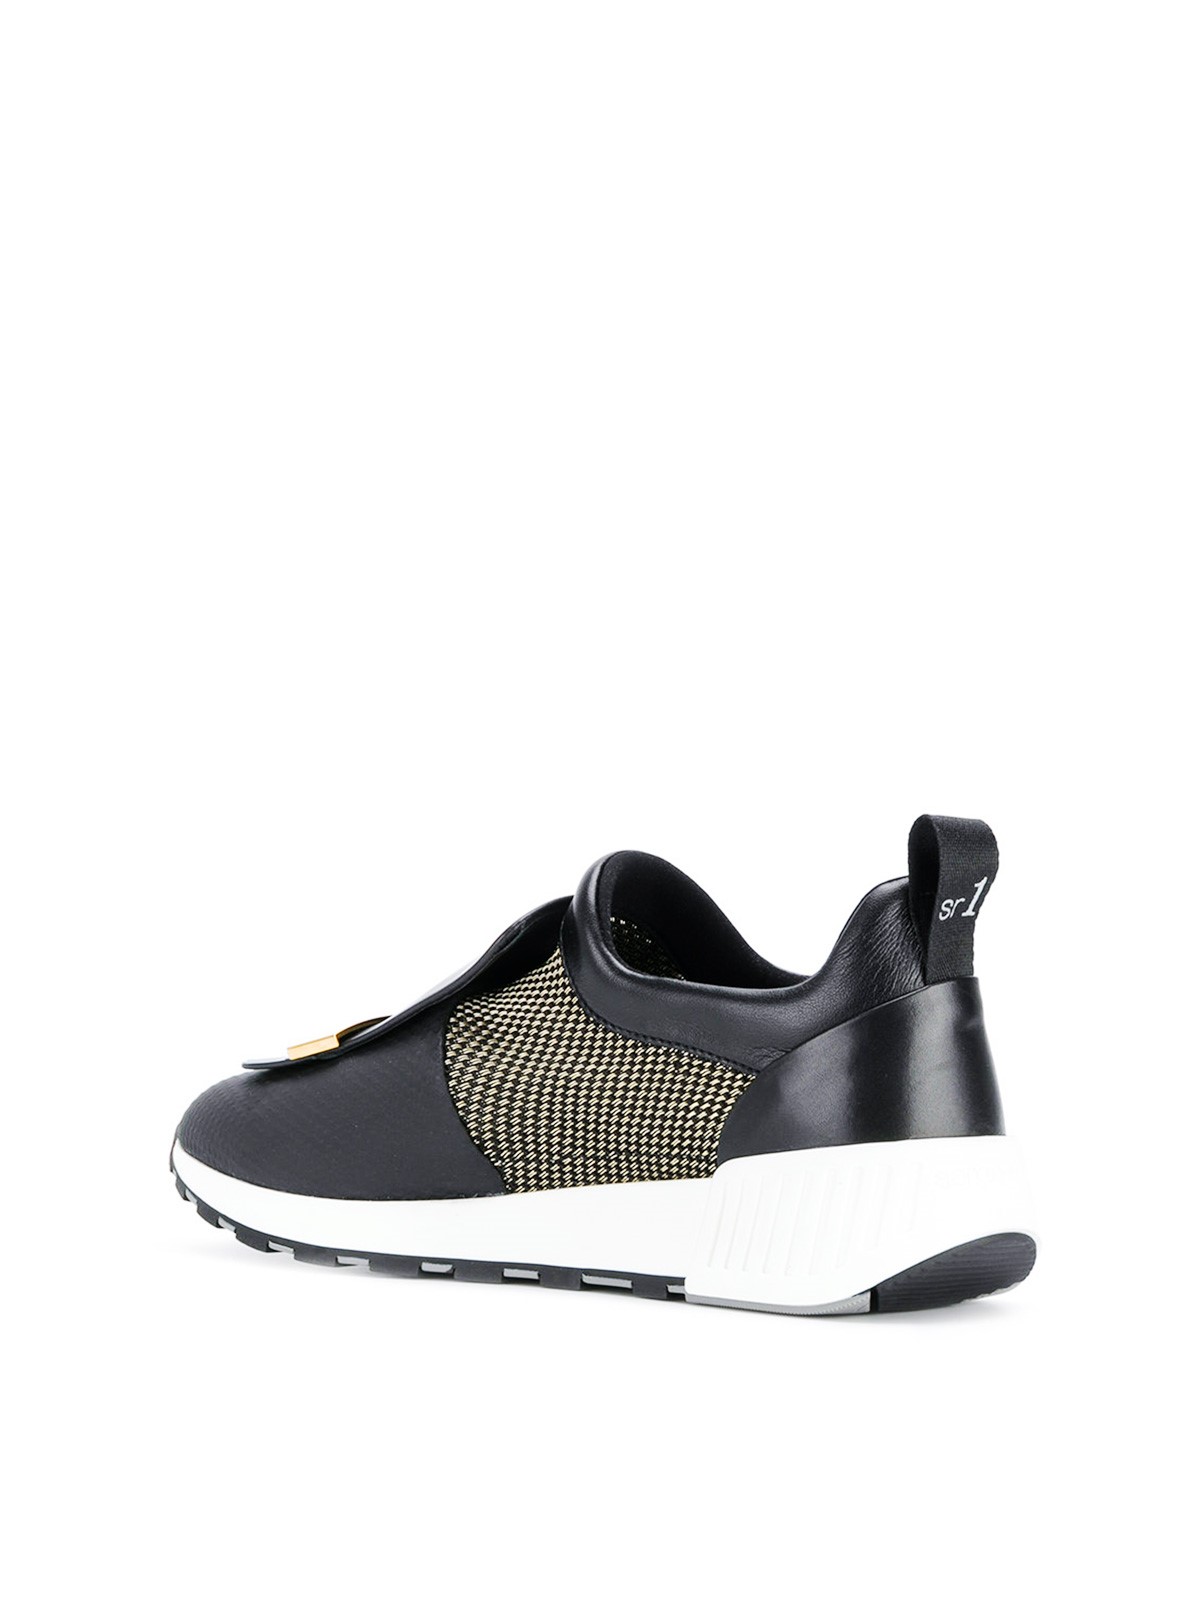 sergio rossi SLIP ON SNEAKERS available on montiboutique.com - 21453